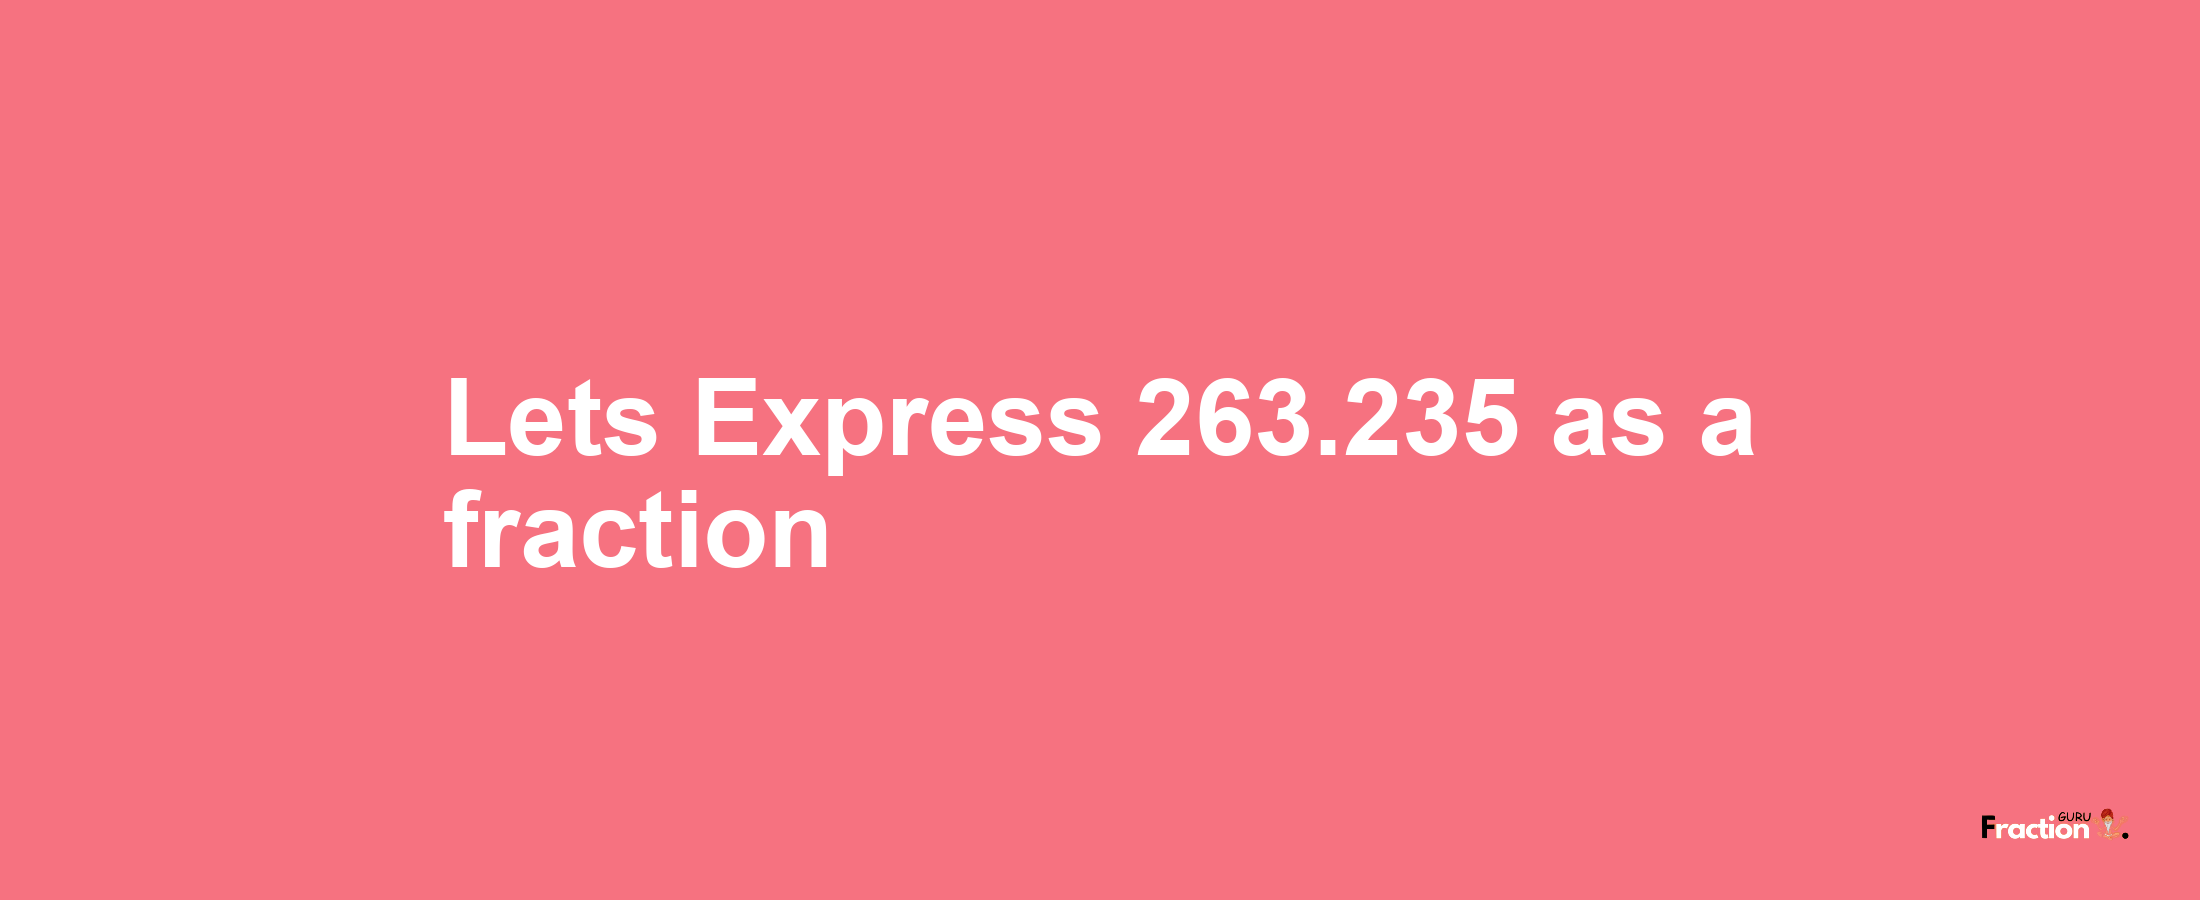 Lets Express 263.235 as afraction